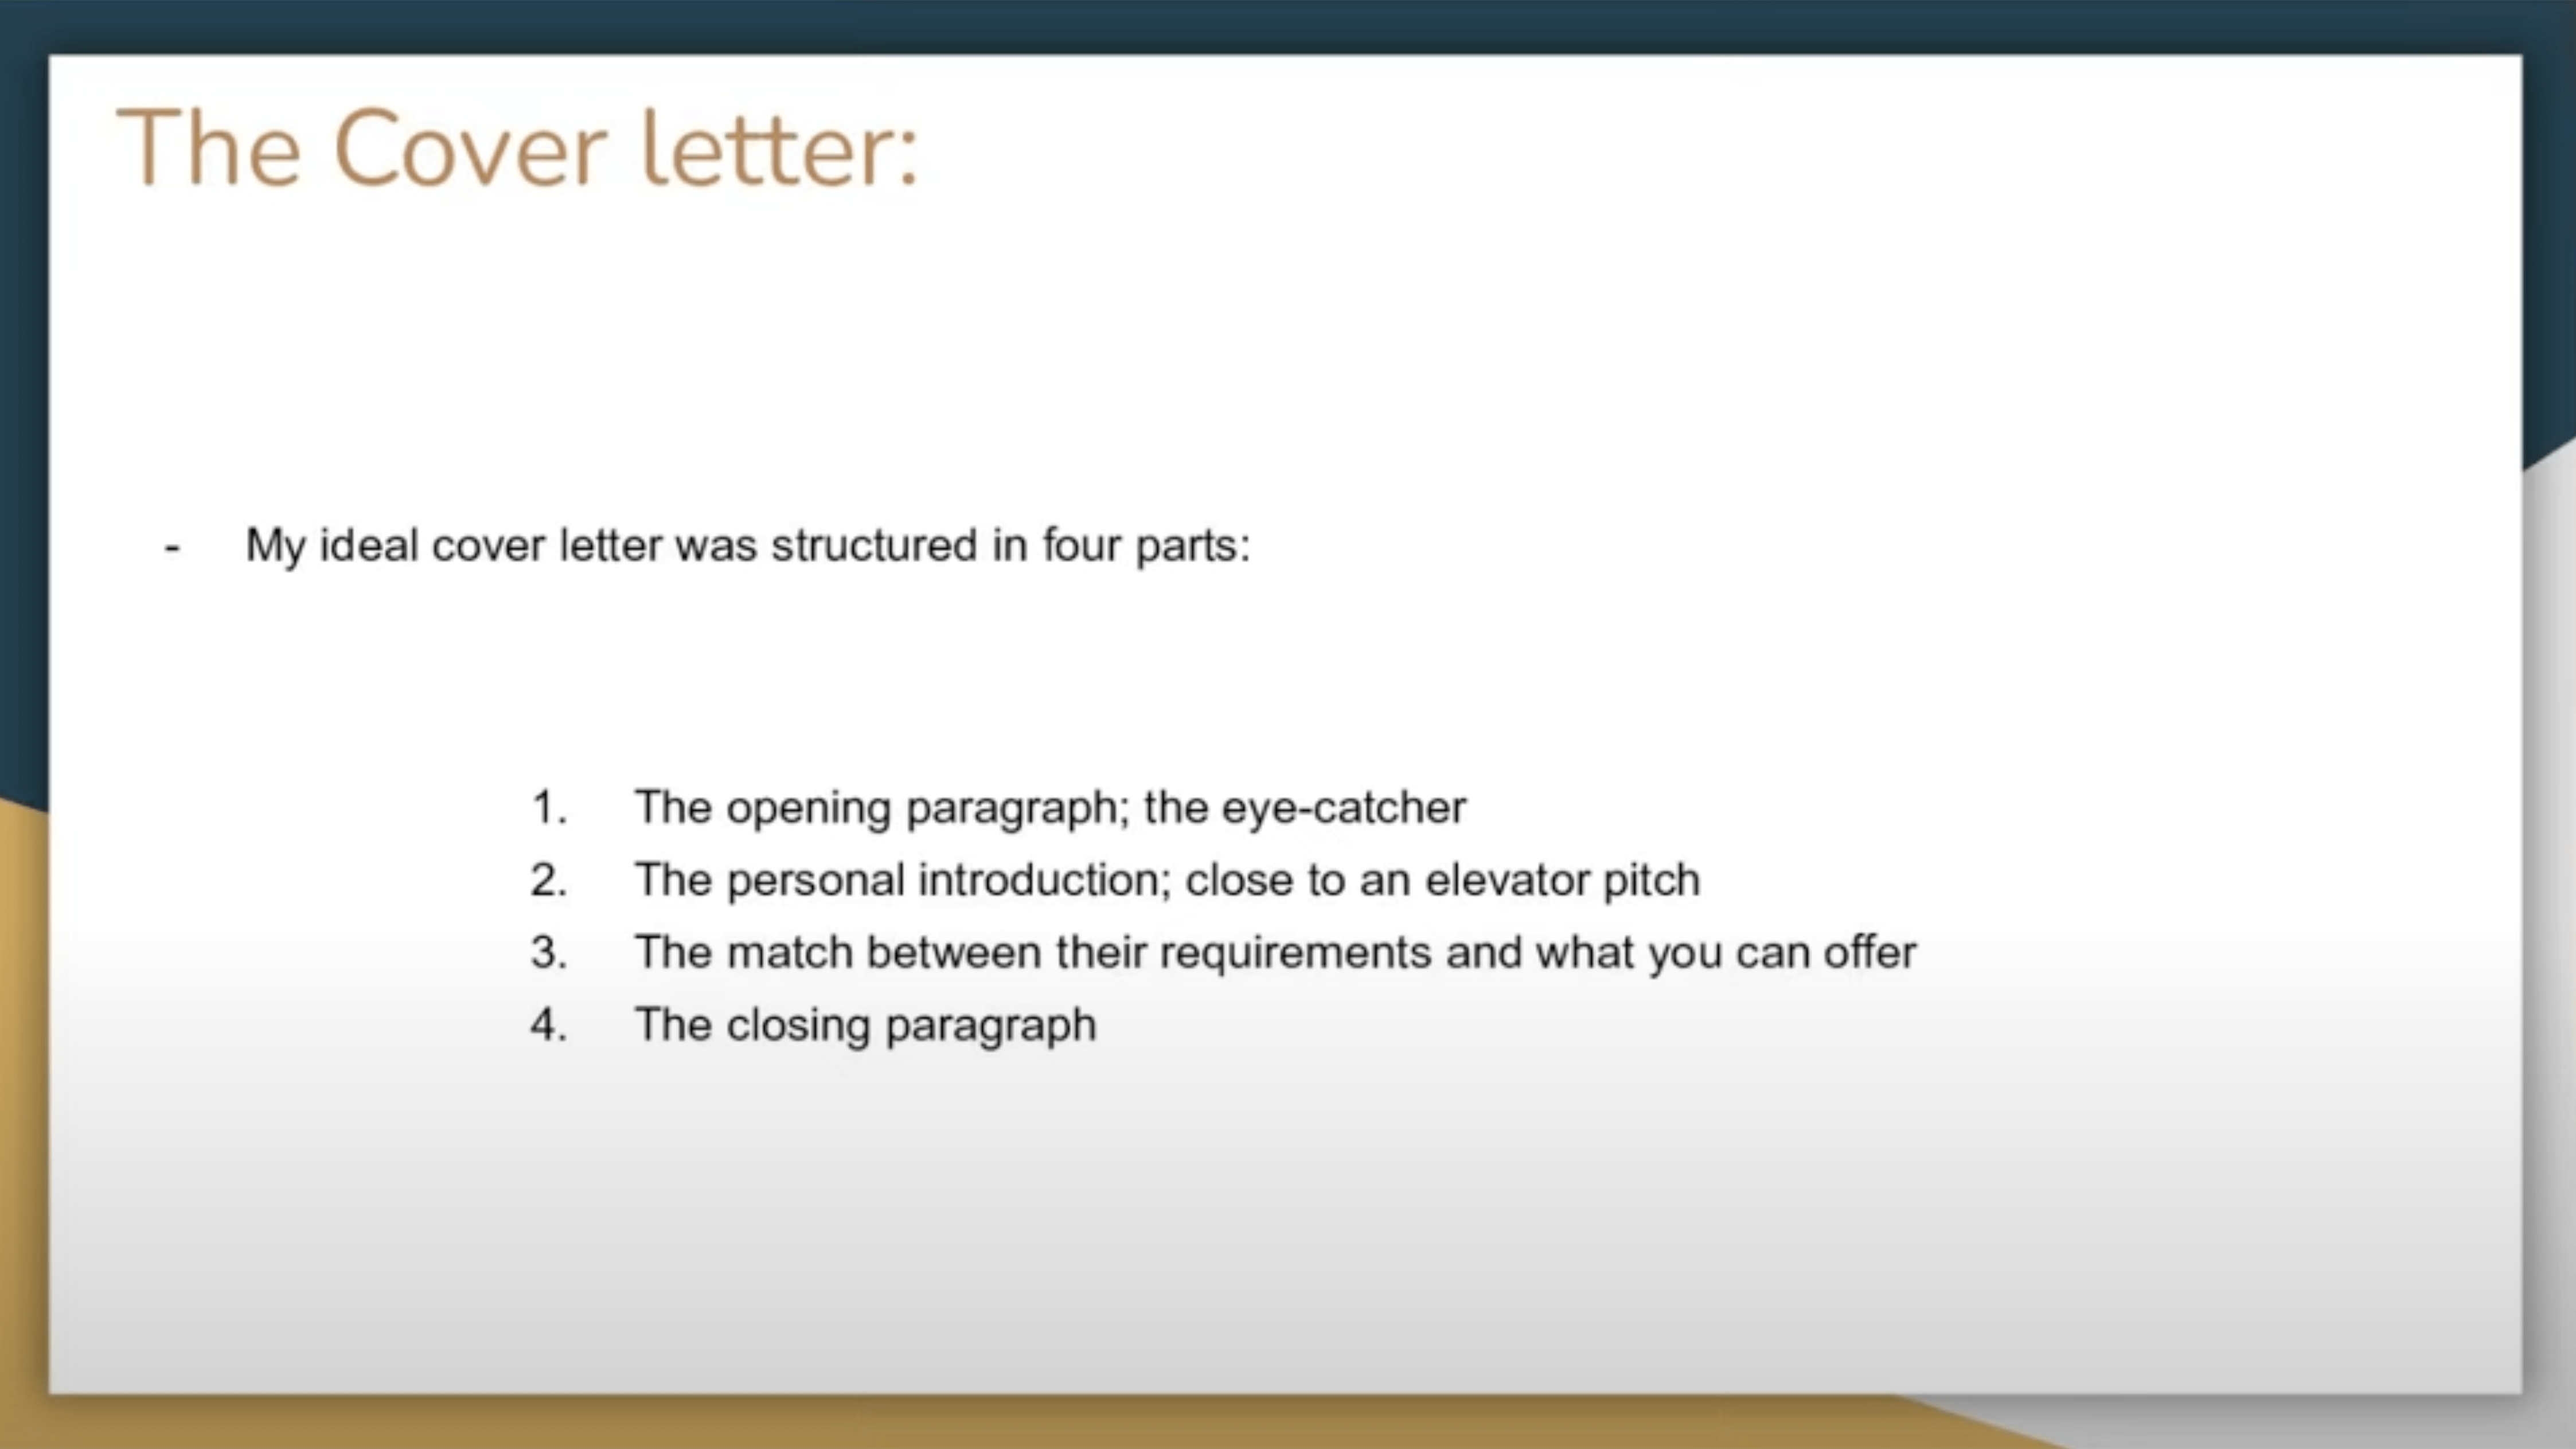 An image taken from Julio's presentation about his cover letter